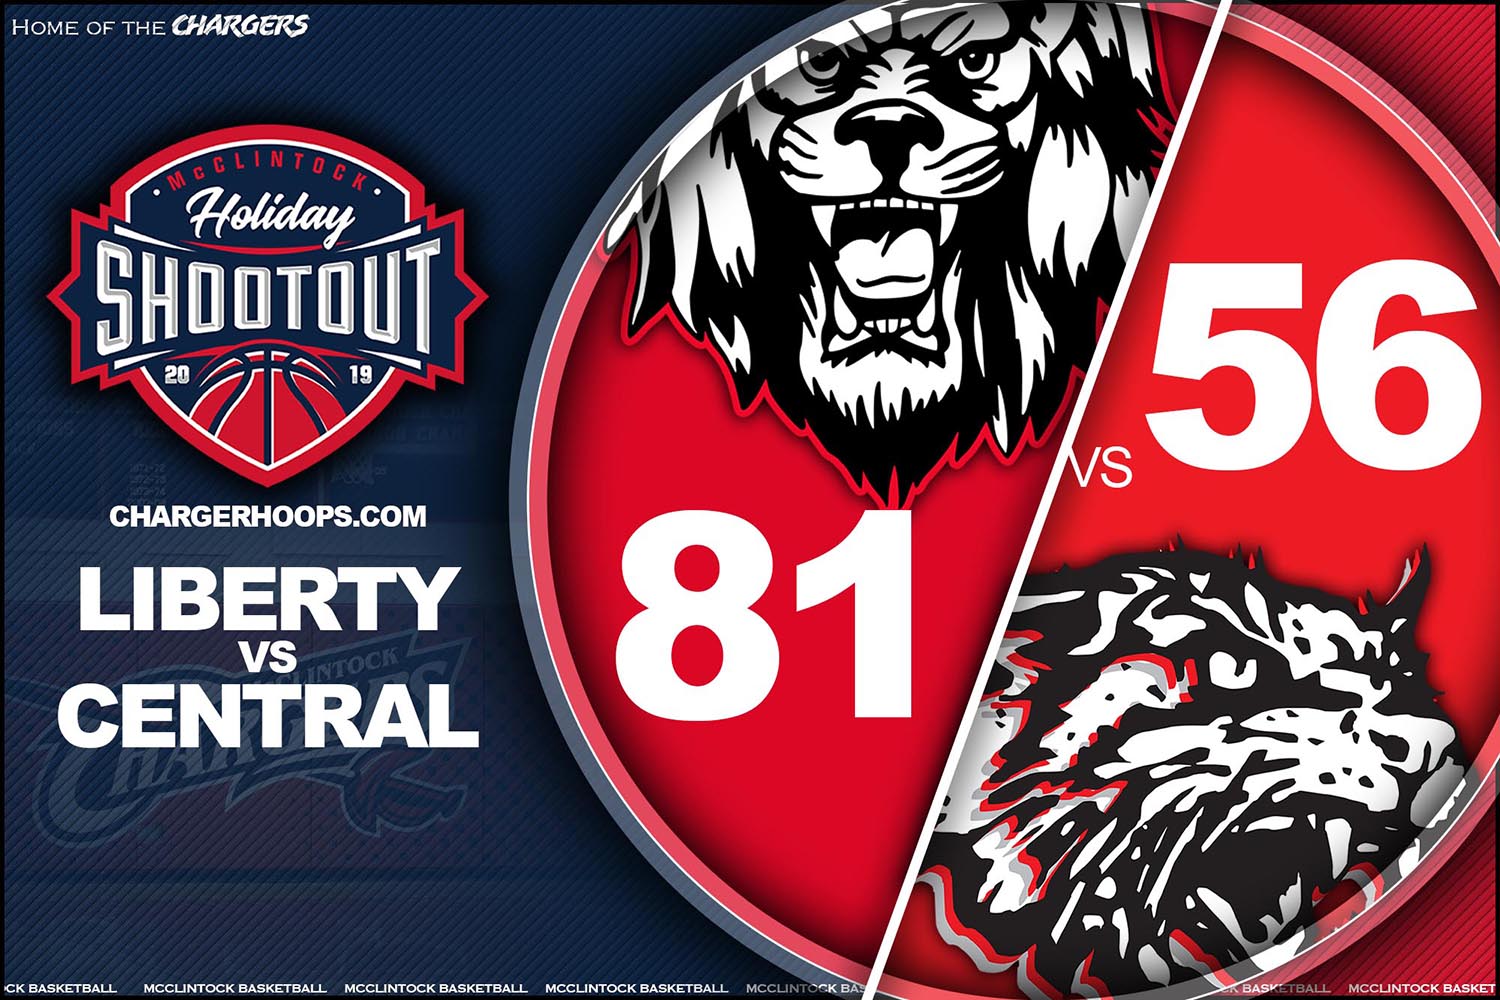 Game 4: Liberty 81 Central 56 Final